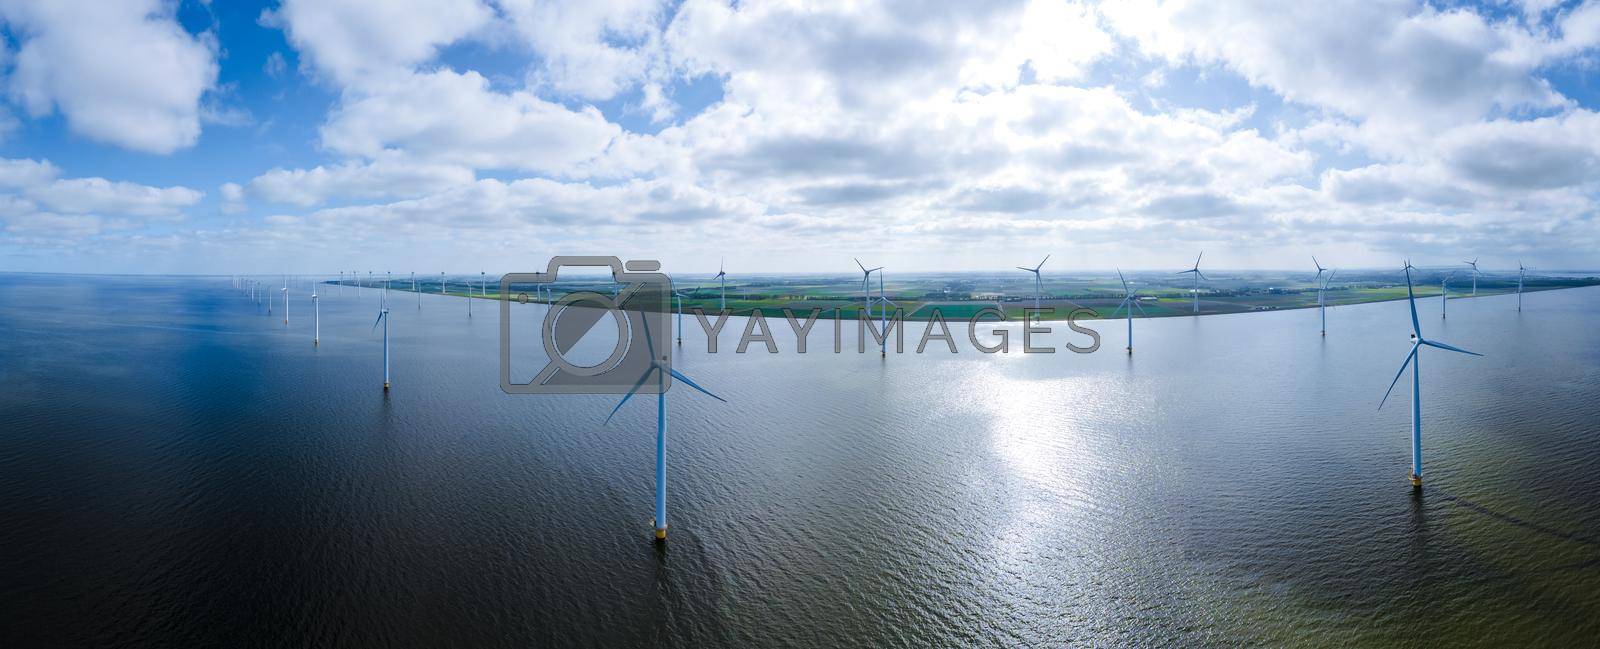 Royalty free image of offshore windmill park with clouds and a blue sky, windmill park in the ocean drone aerial view with wind turbine Flevoland Netherlands Ijsselmeer by fokkebok